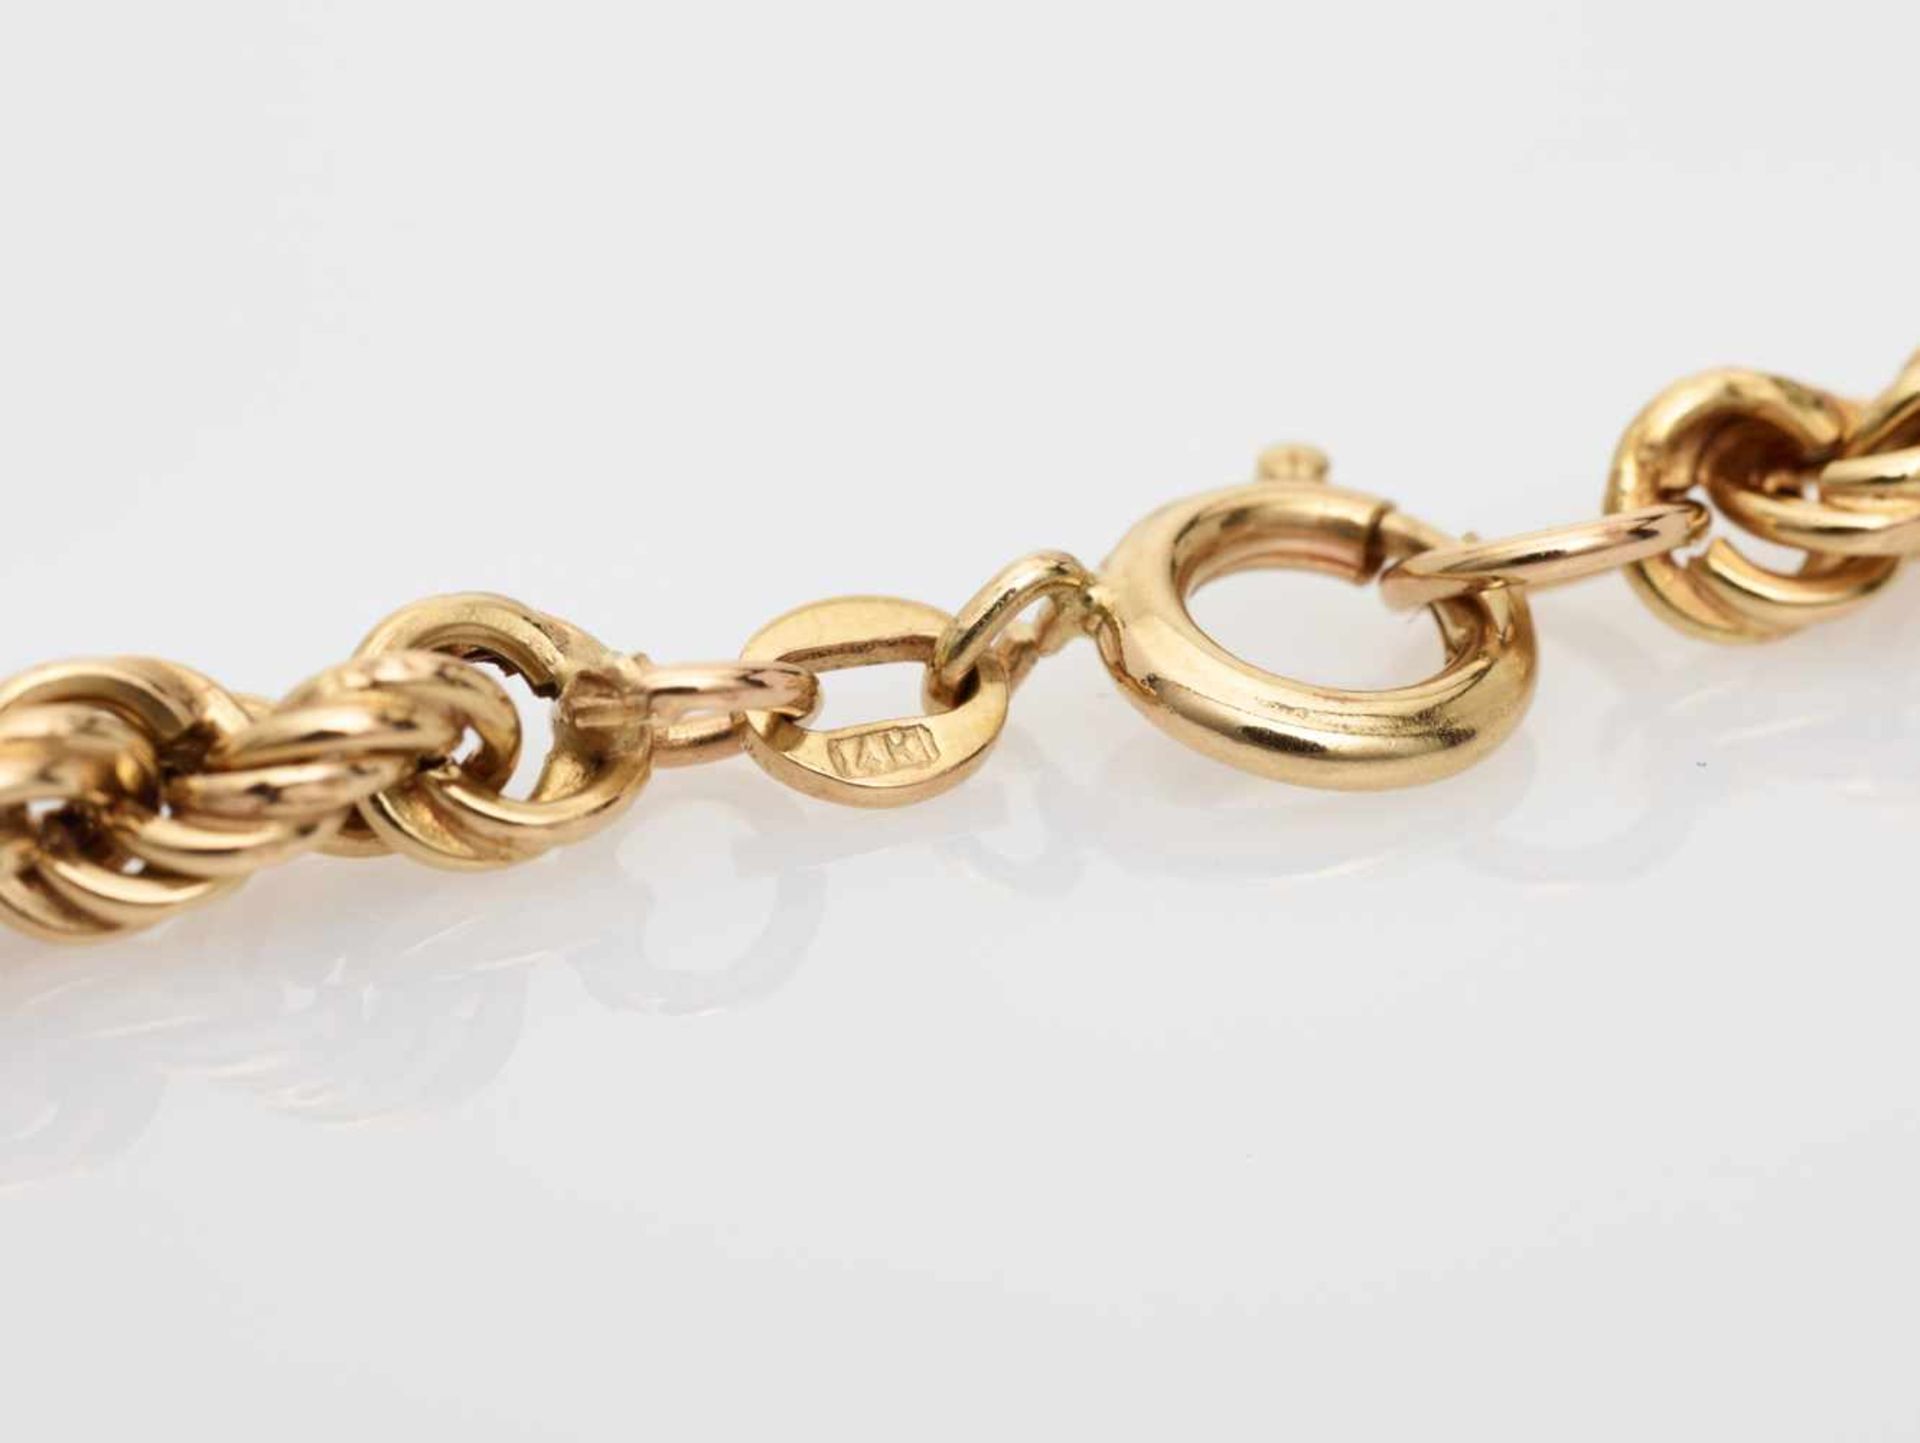 A 14 CARAT ROSE GOLD PRINCE OF WALES CHAIN NECKLACEAustria1930s-1950s, hallmarked ‘14K’ as well as - Image 3 of 9